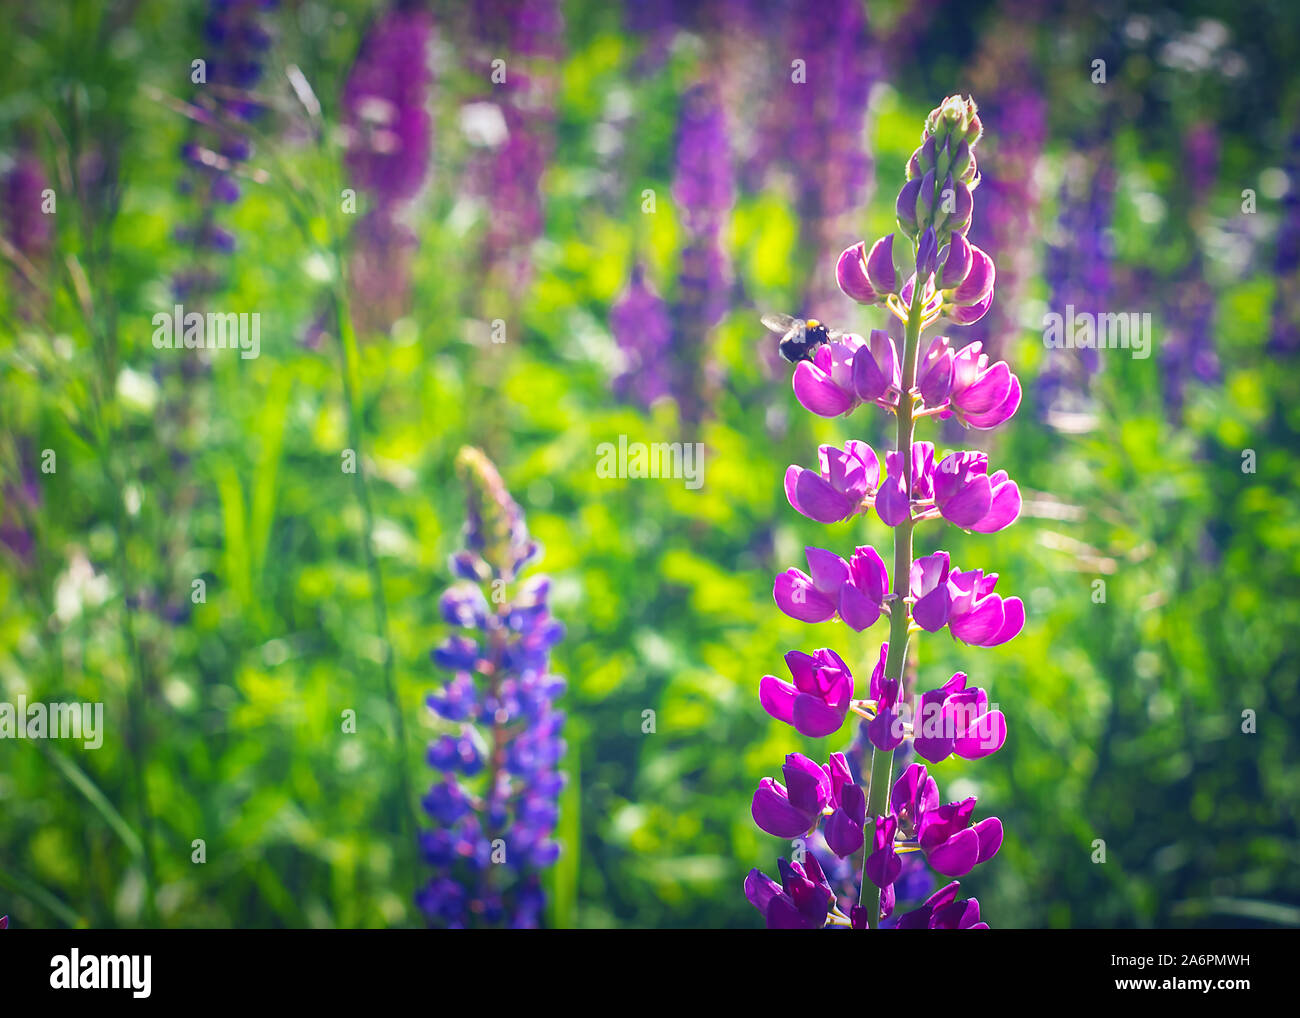 Bumblebee on Purple Flowers of Fireweed or Willowherb, Chamaenerion Angustifolium, on a Sunny Summer Day. Pollination Concept. Stock Photo